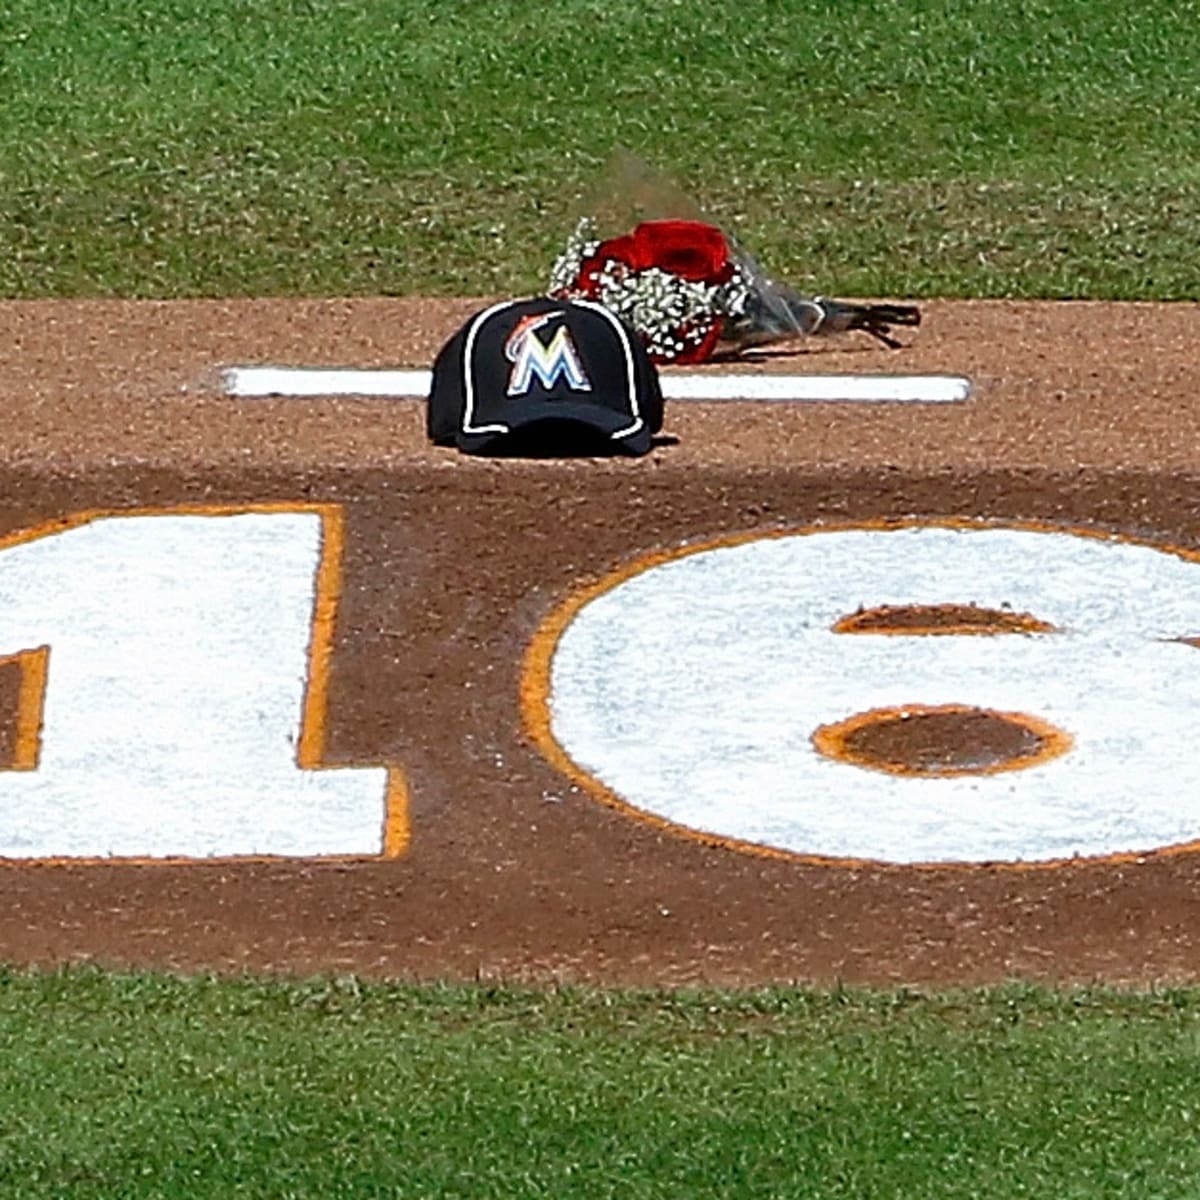 Marlins Pay Tribute to Jose Fernandez by Wearing No. 16 Jersey - ABC News